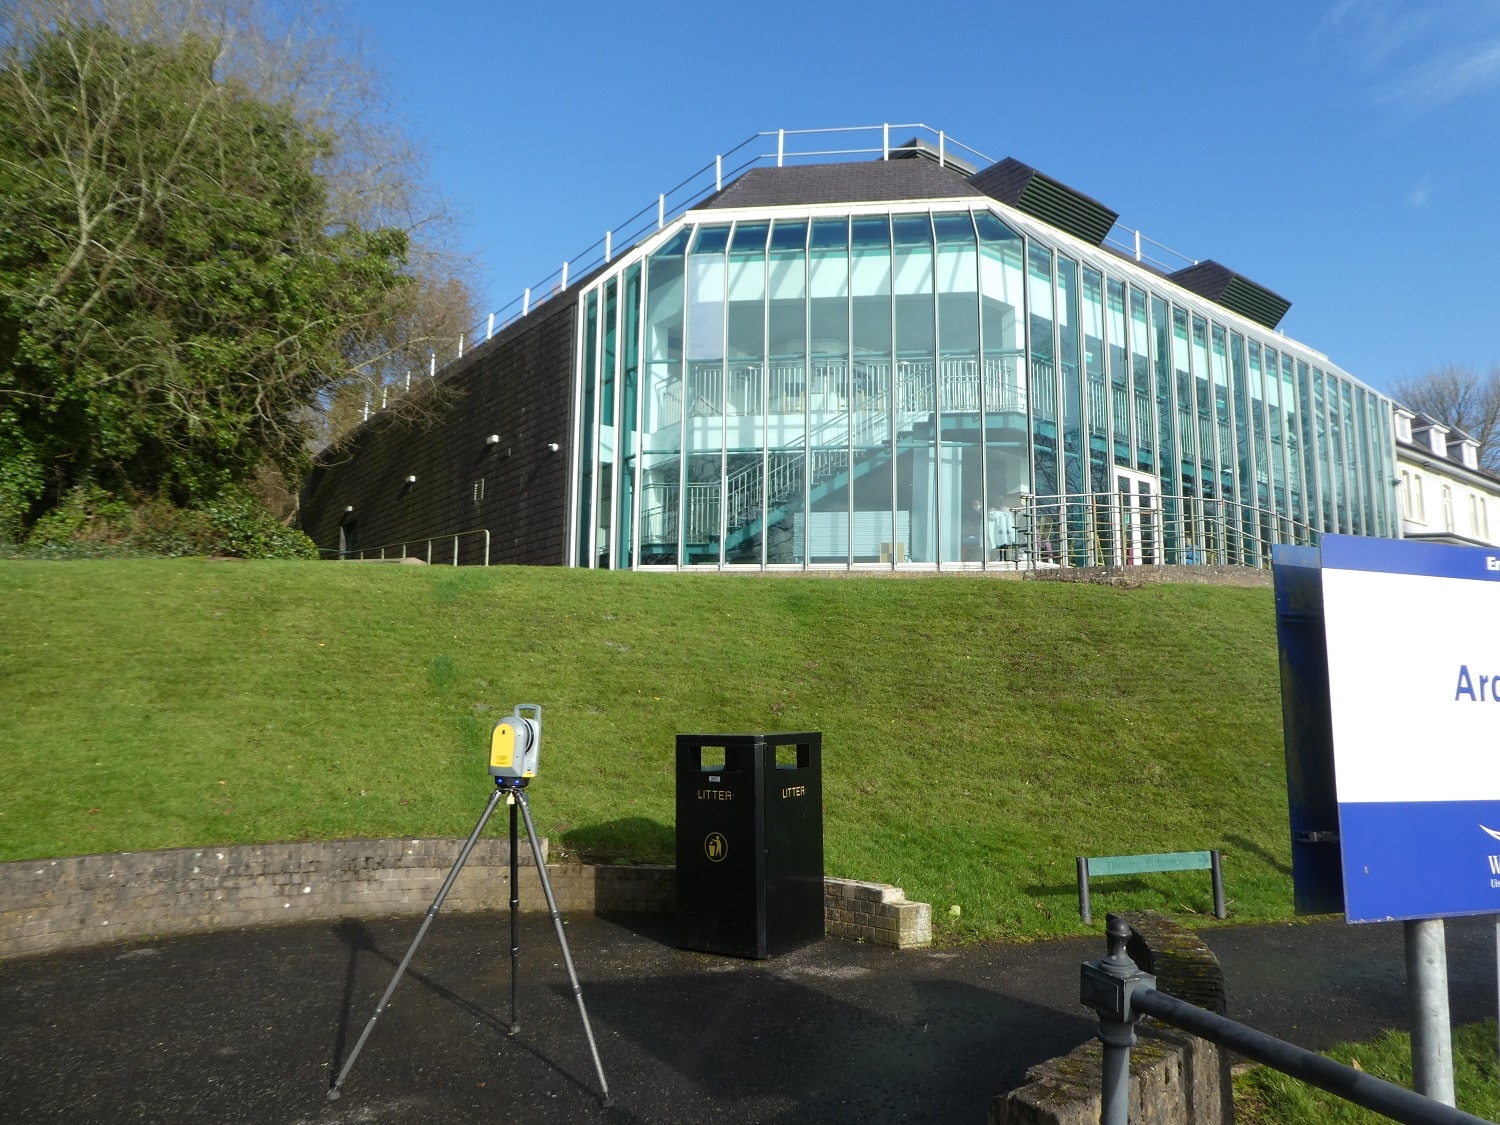 Photograph of 26,000sq/ft Listed Commercial building Ardhowen Theatre in Enniskillen, showing 3d laser scanner used to collect the 3D point-cloud data.